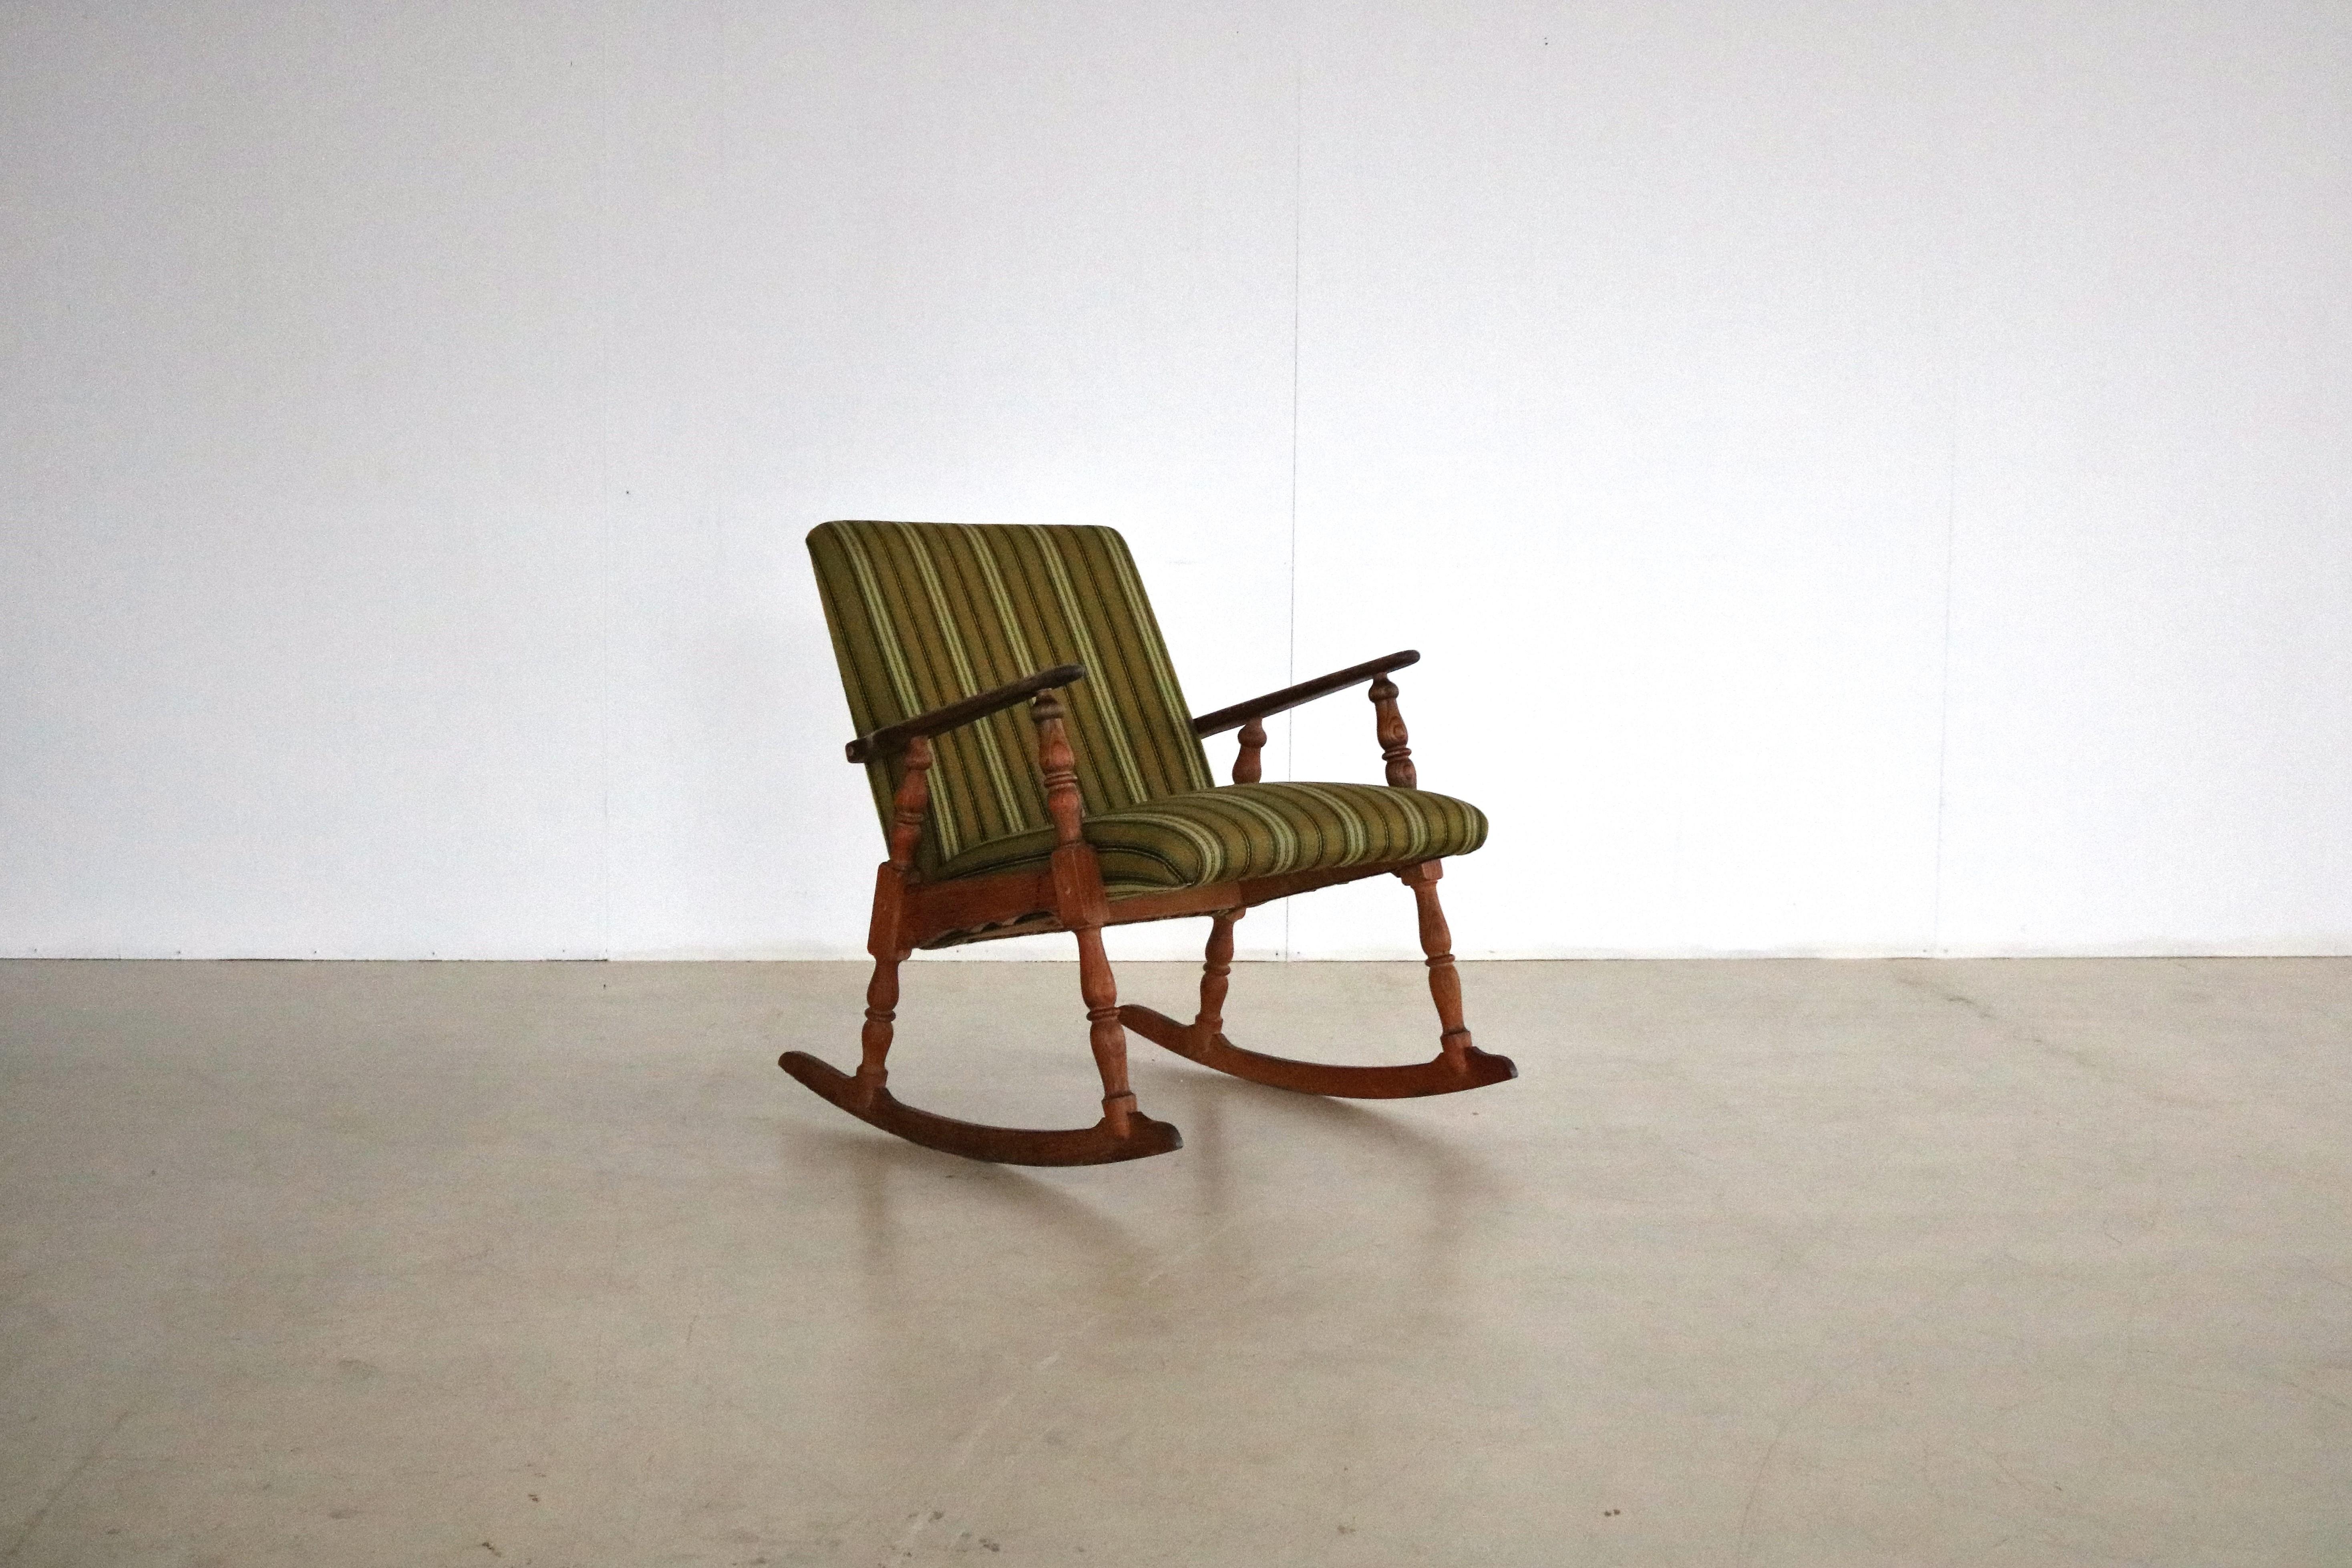 
vintage rocking chair  armchair  brutalist  50s  Danish

period  1950s
designs  Danish furniture manufacturer  Denmark
conditions  good  light signs of use
size  77 x 64 x 75 (hxwxd)

details  oak; fabrics;
article number  1842